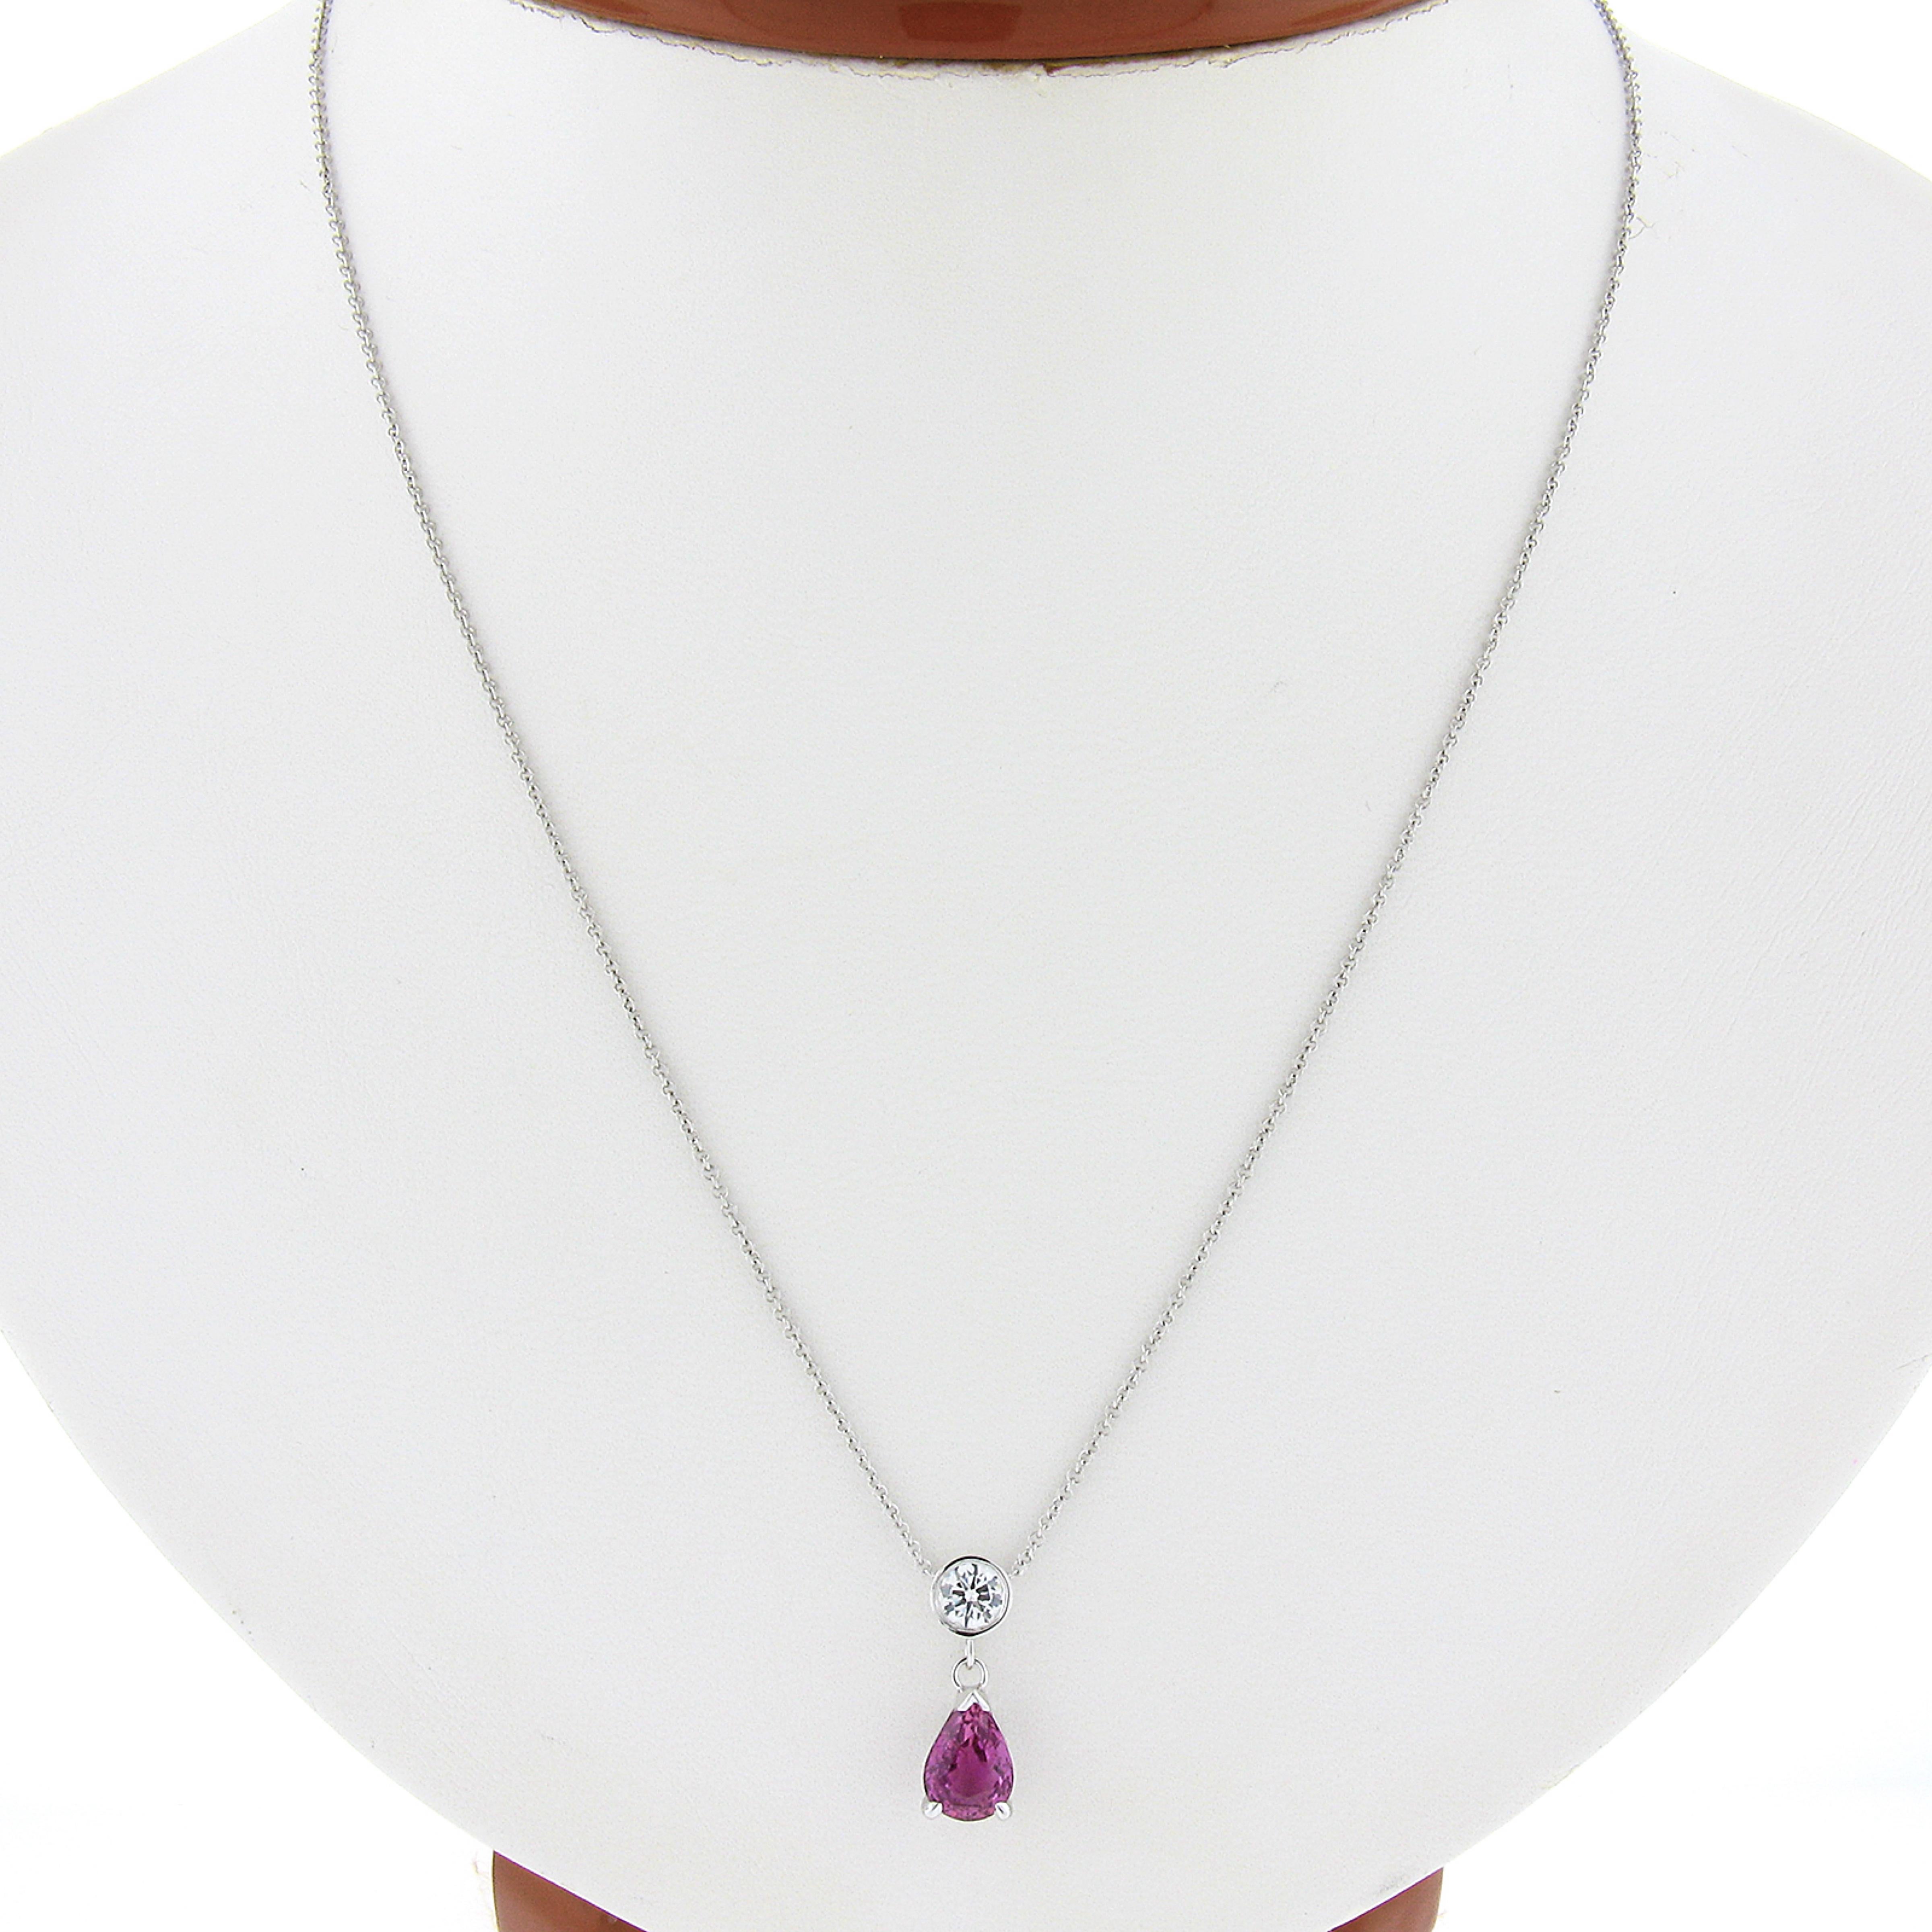 This amazing pendant necklace is newly crafted in solid 14k white gold featuring an outstanding drop dangle design with a fine diamond and sapphire stone. The pear cut sapphire is neatly prong set in an open basket setting, and stands out with its